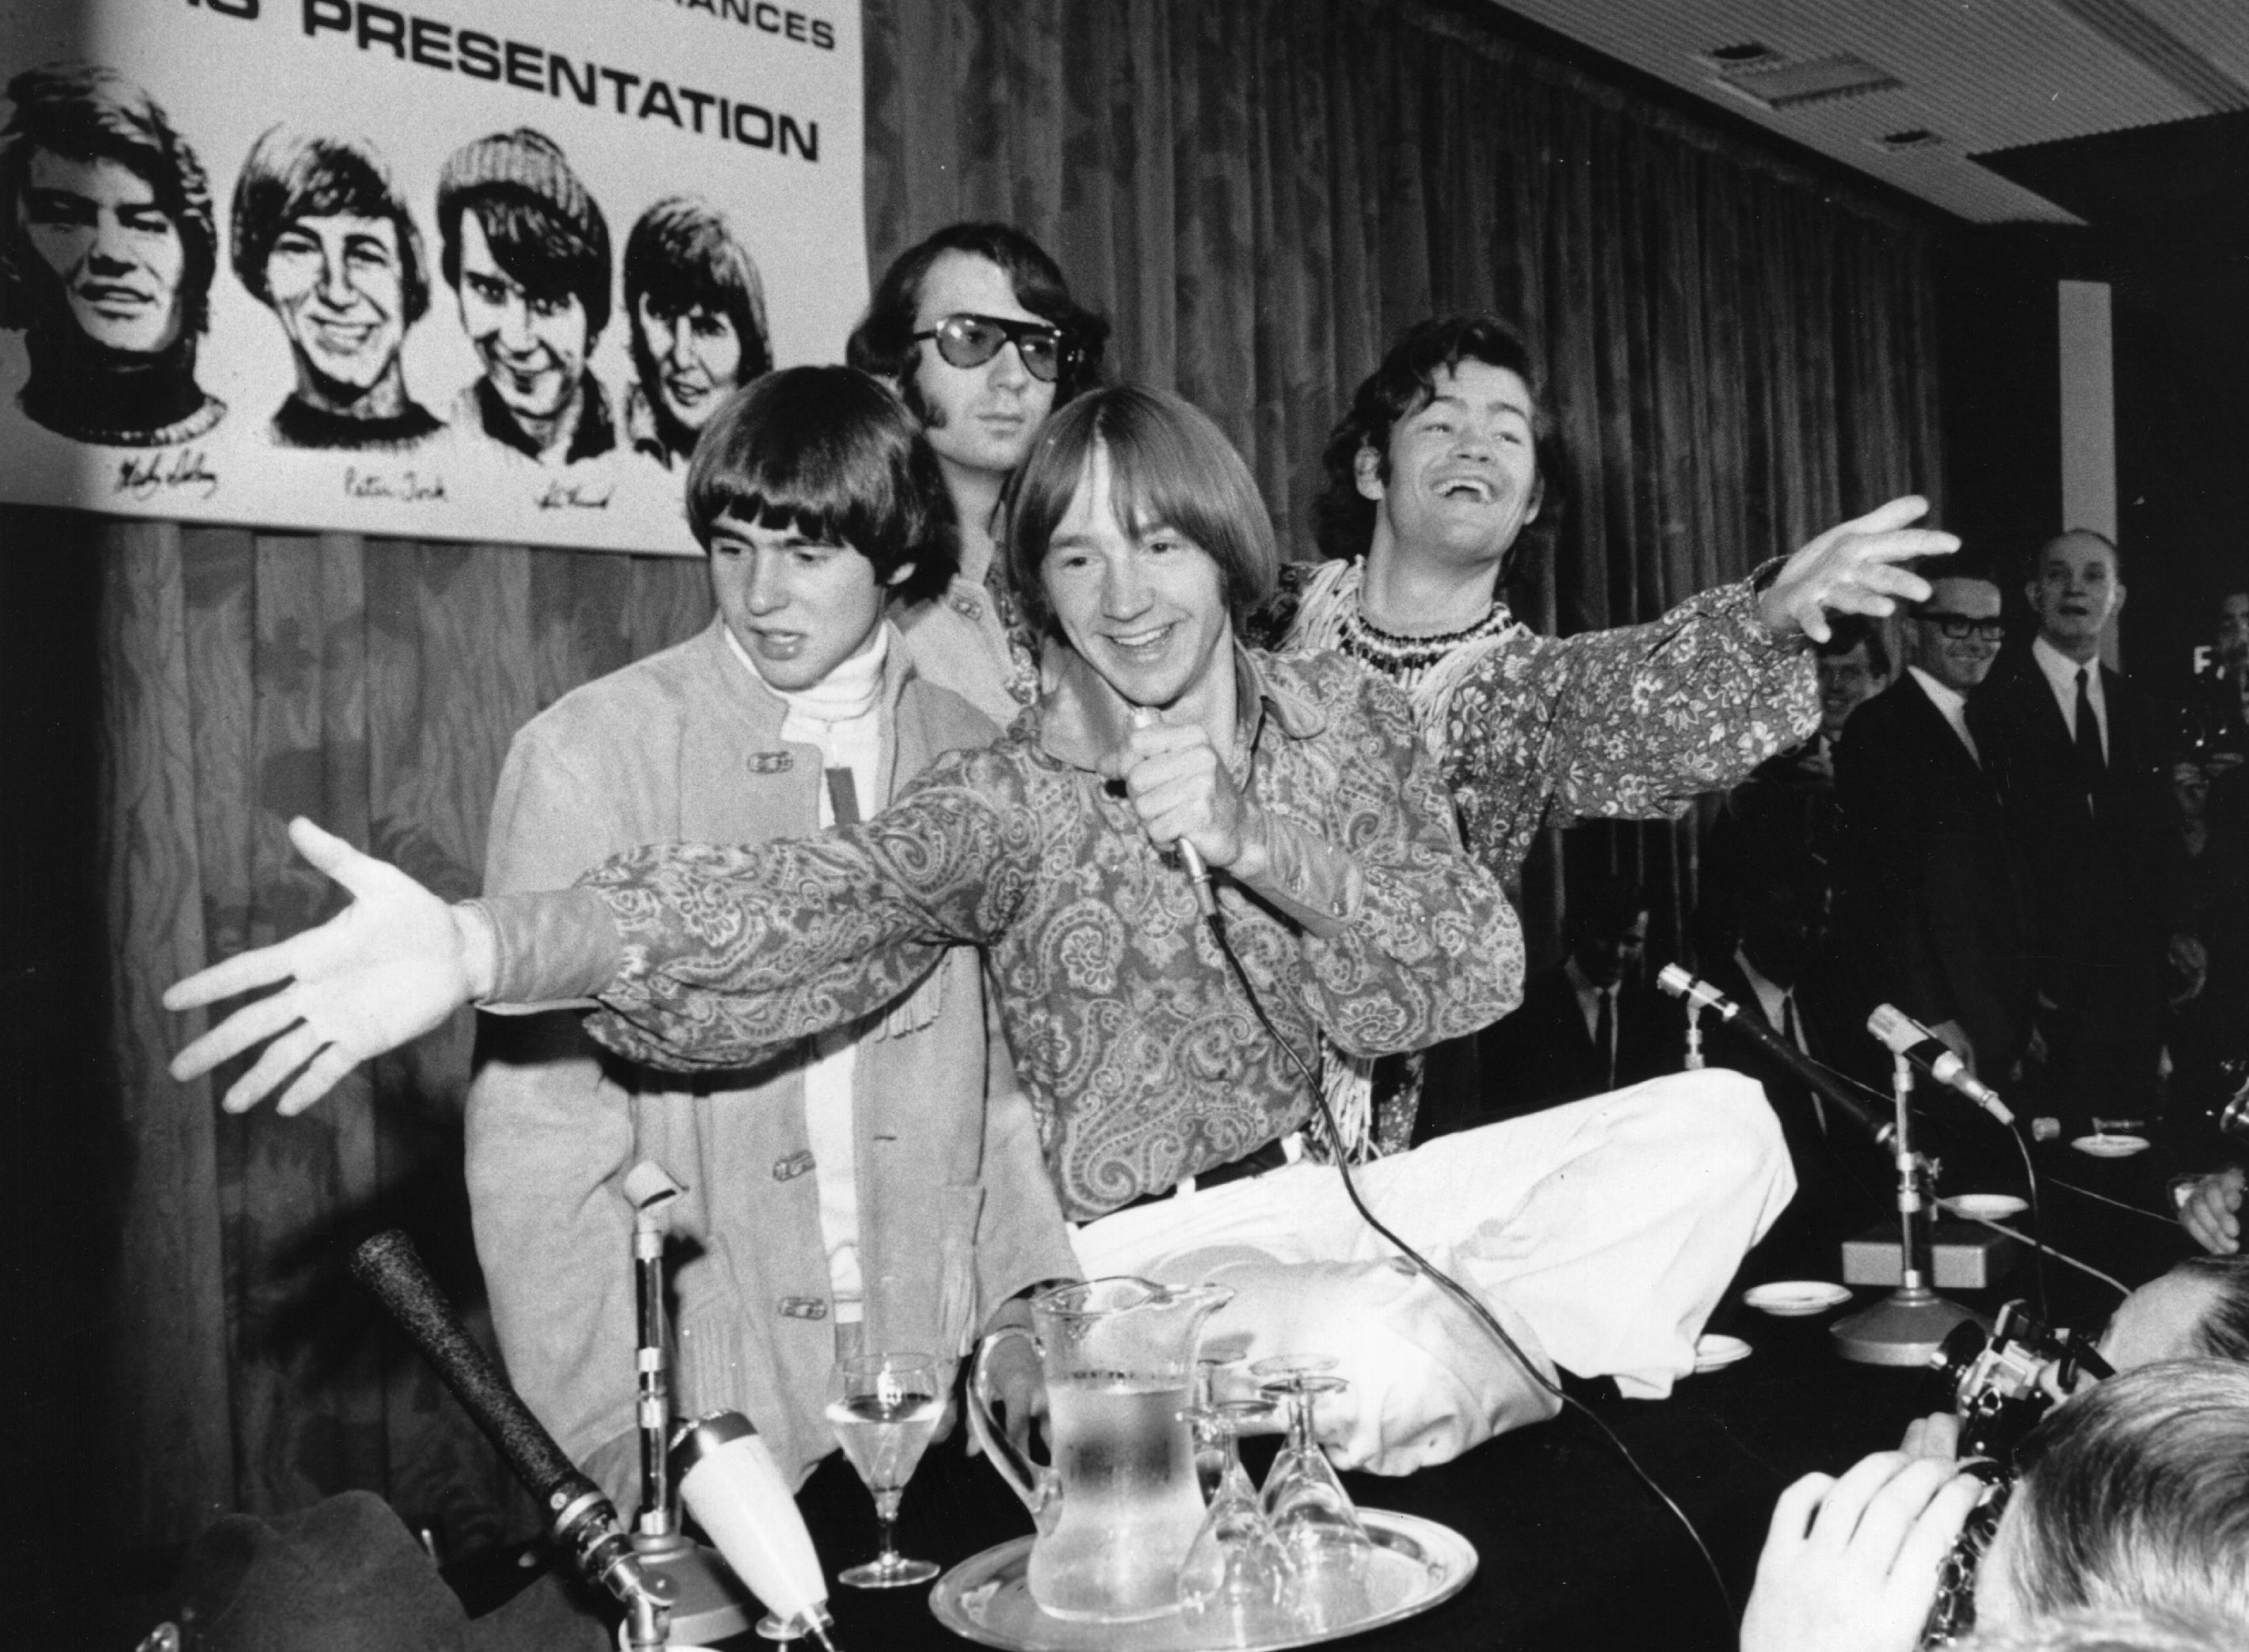 The Monkees near a pitcher